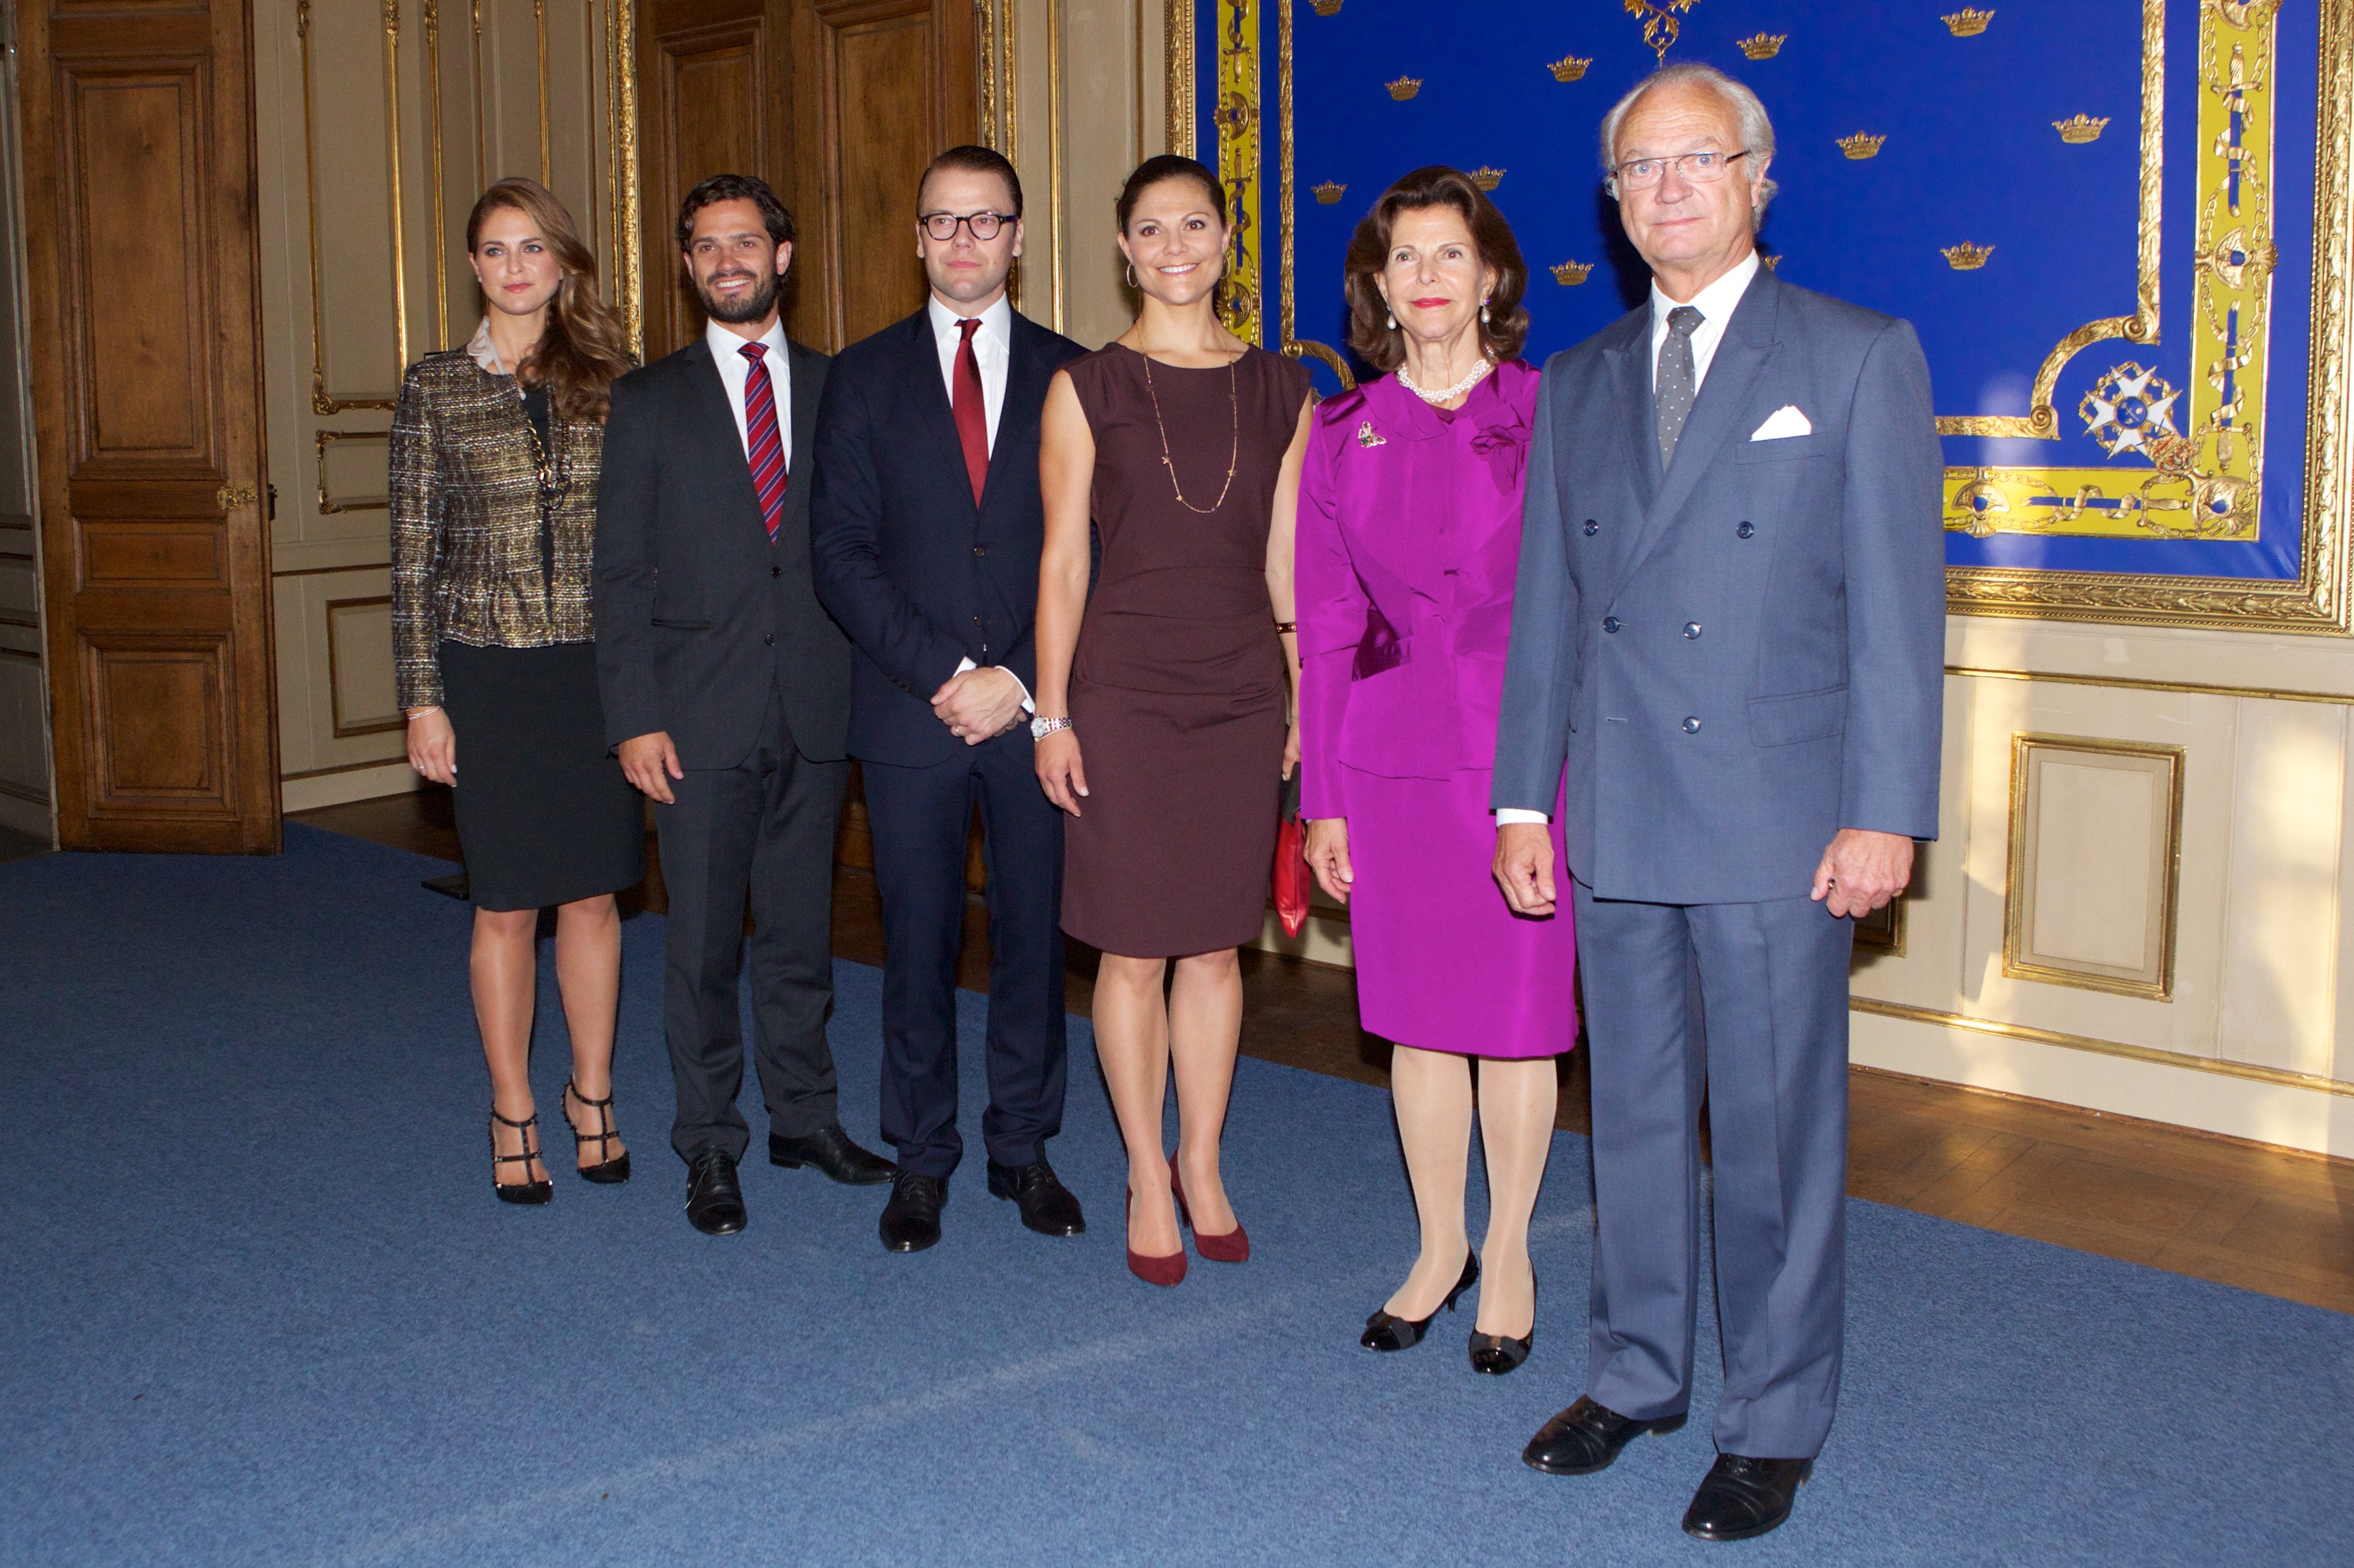 The Swedish royal family: Princess Madeleine, Prince Philip, Prince Daniel, Crown Princess Victoria, Queen Silvia and King Carl XVI Gustaf [Left to Right] at the Royal Palace on September 13 2013 | Source: Getty Images